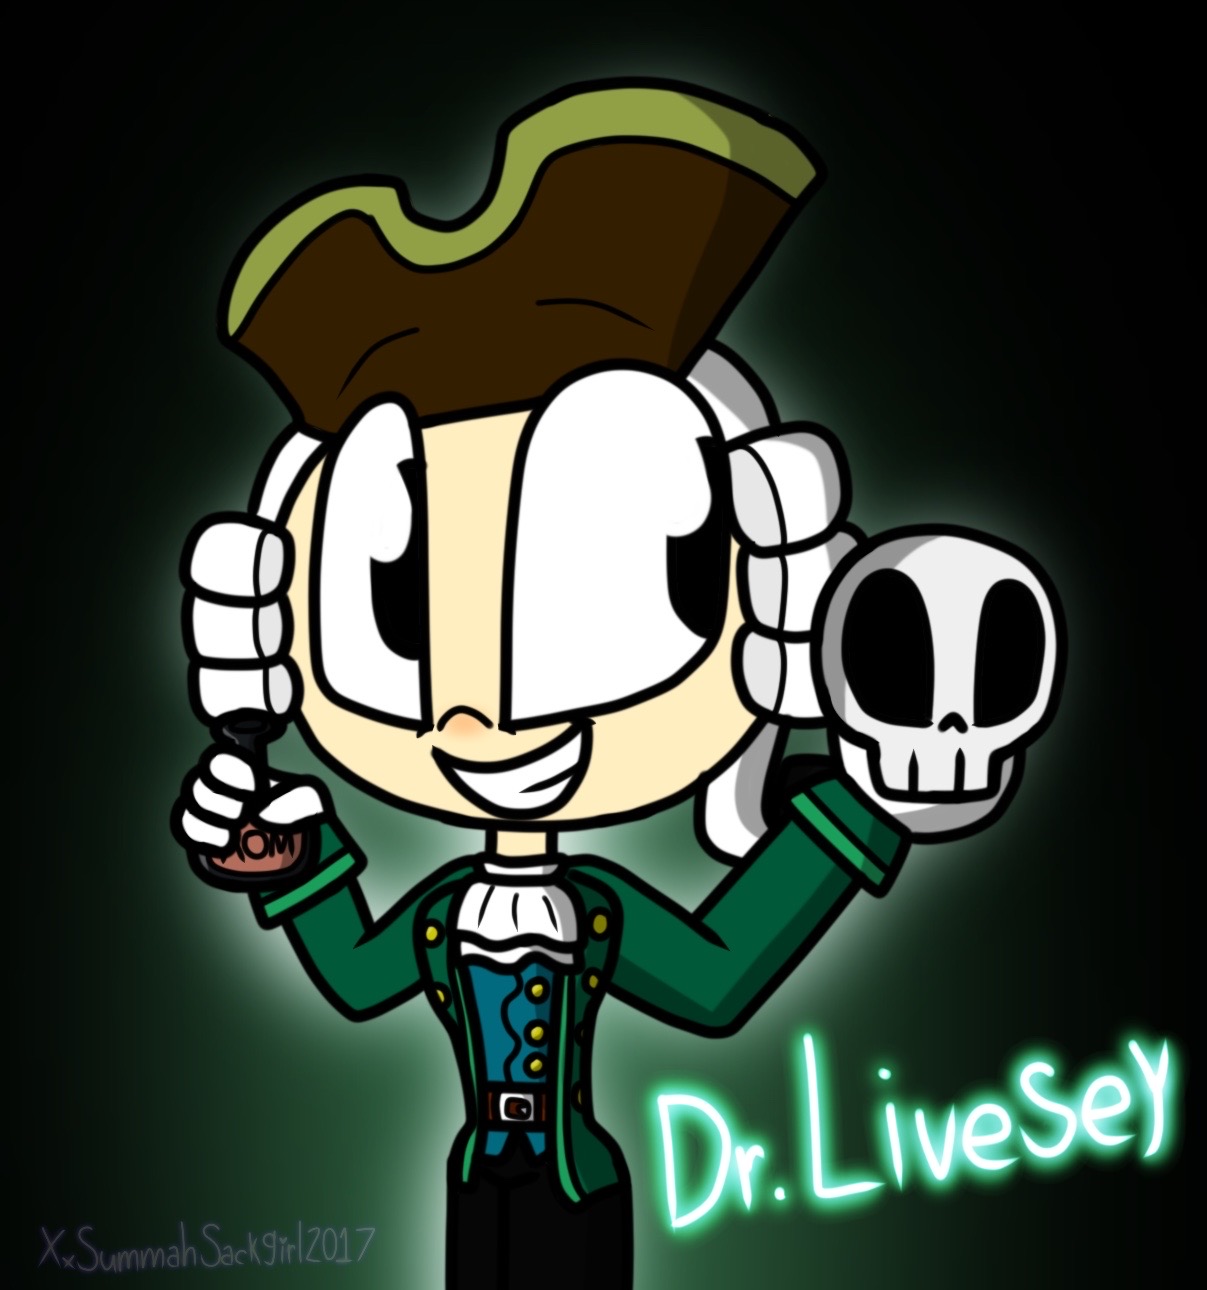 Doctor Livesey by Xonniart on DeviantArt